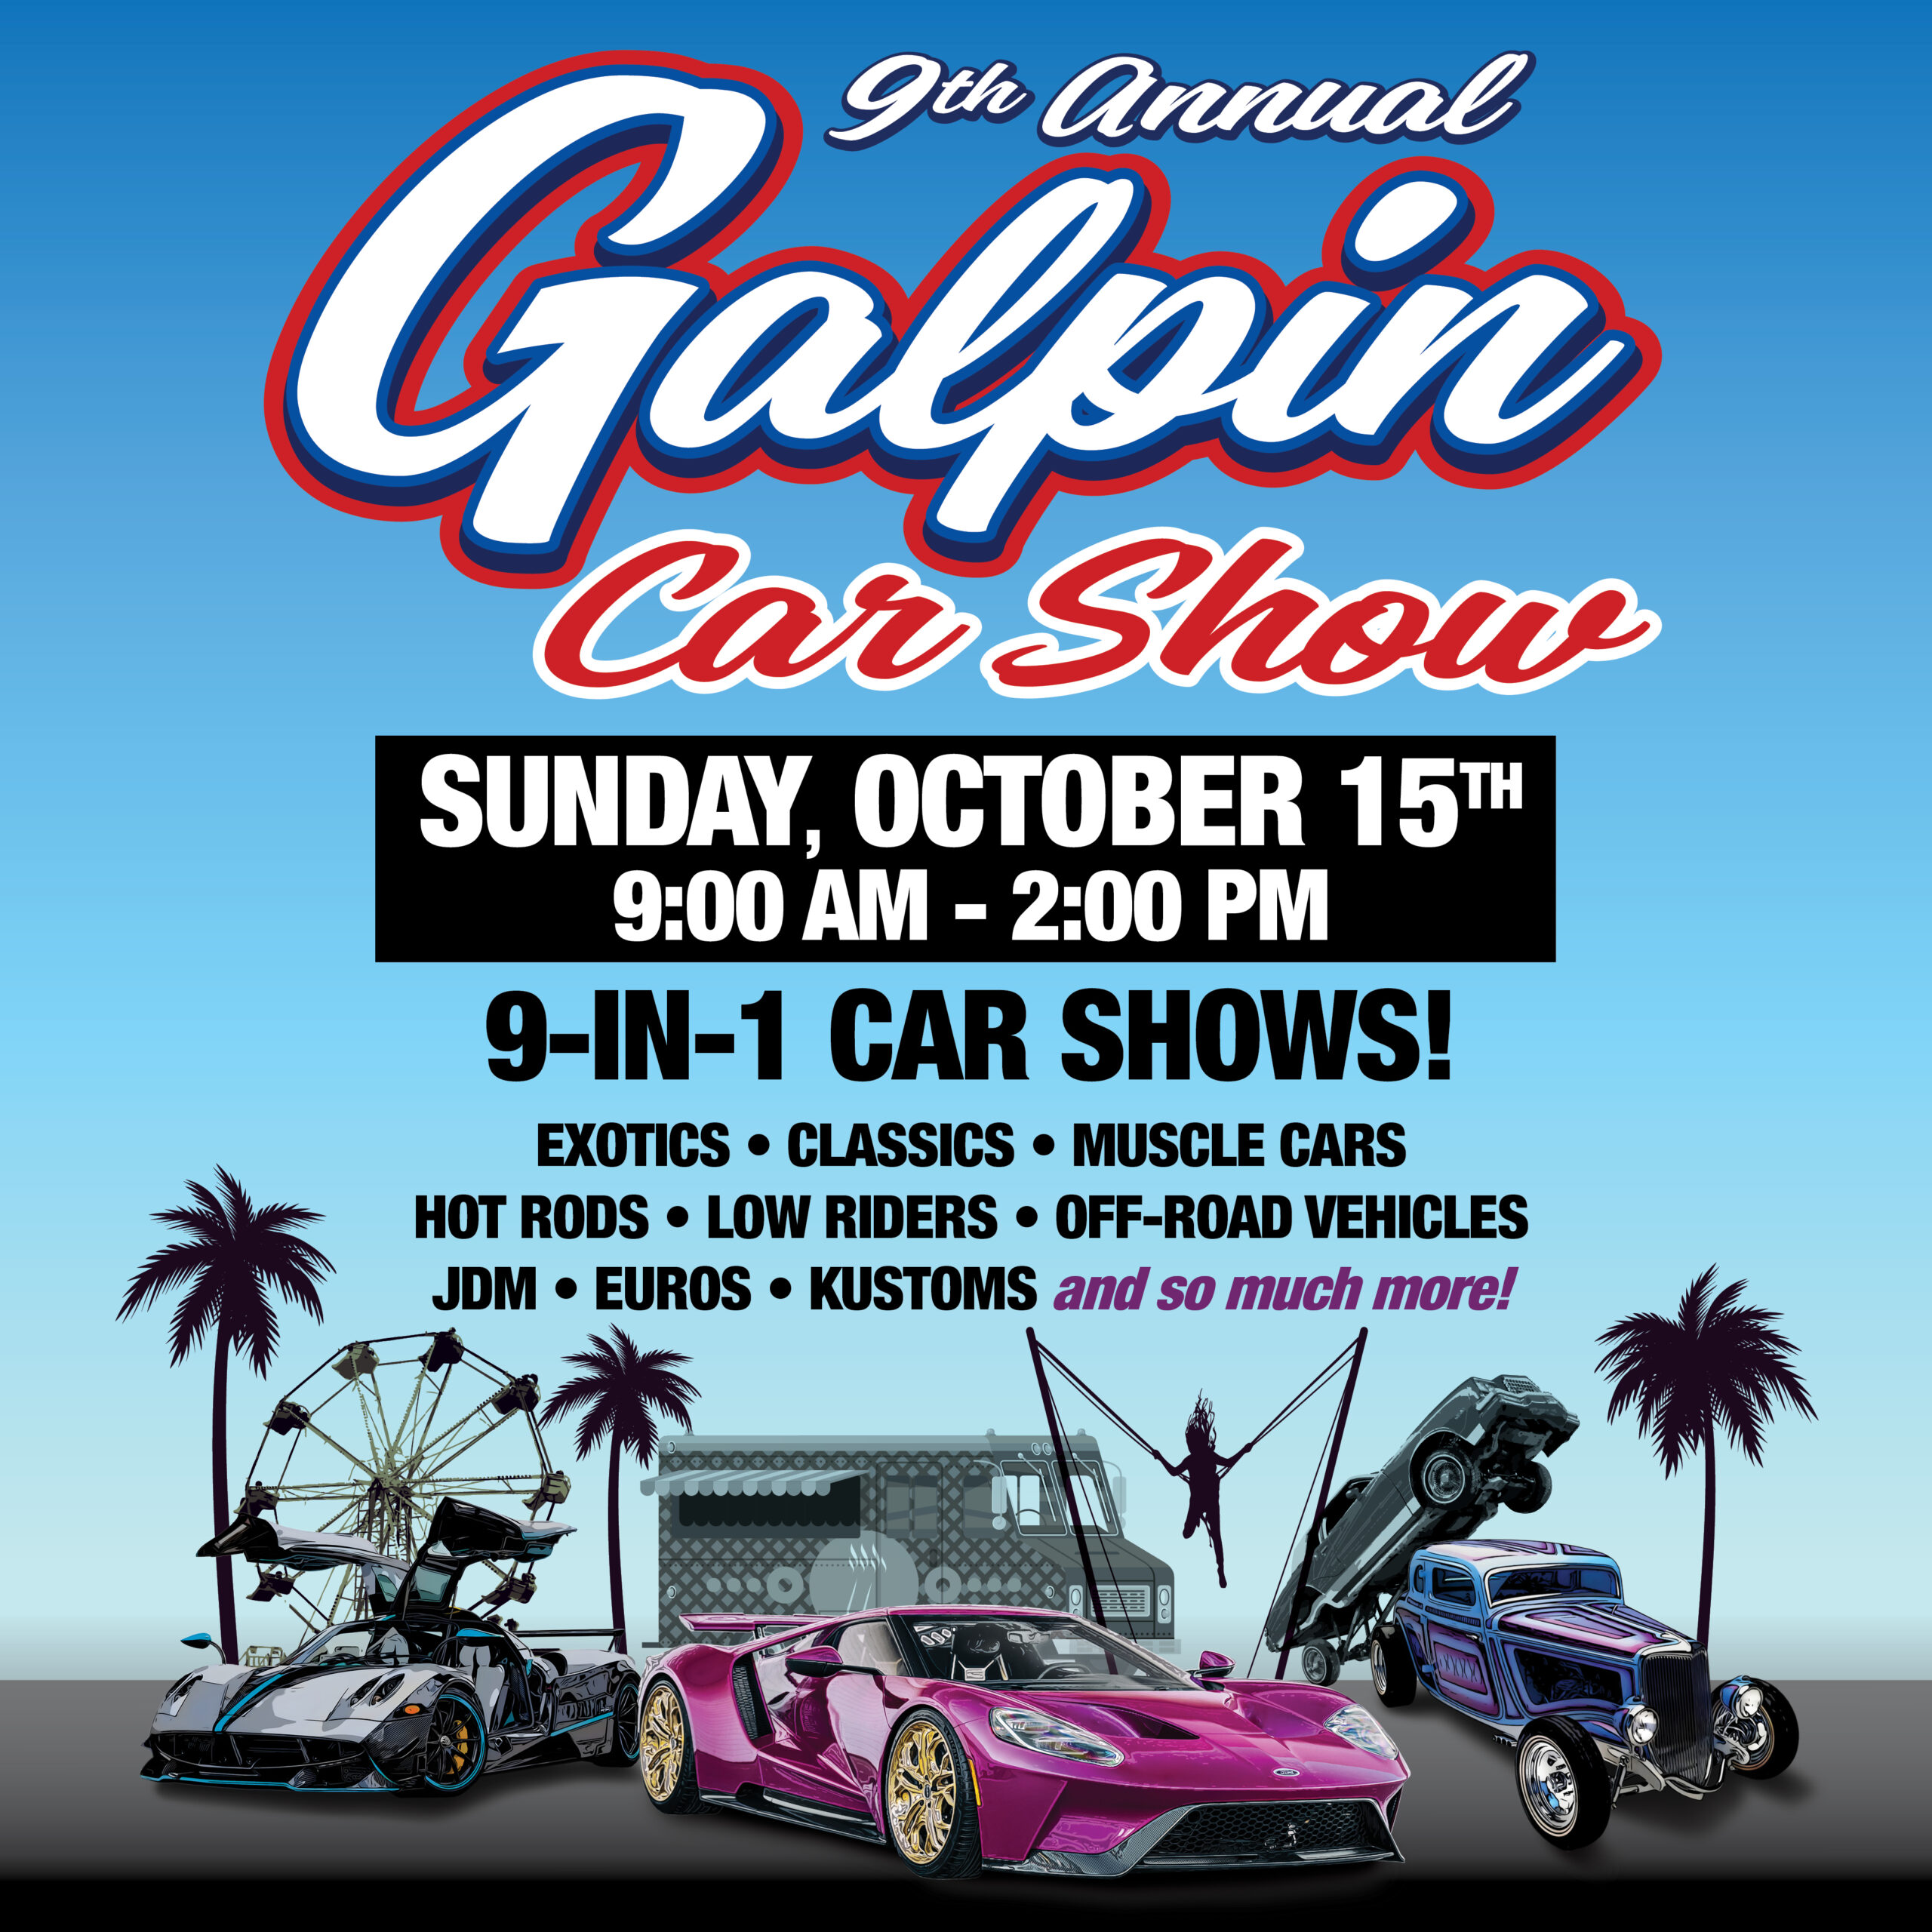 Galpin Motors Revives Annual Auto Show | THE SHOP